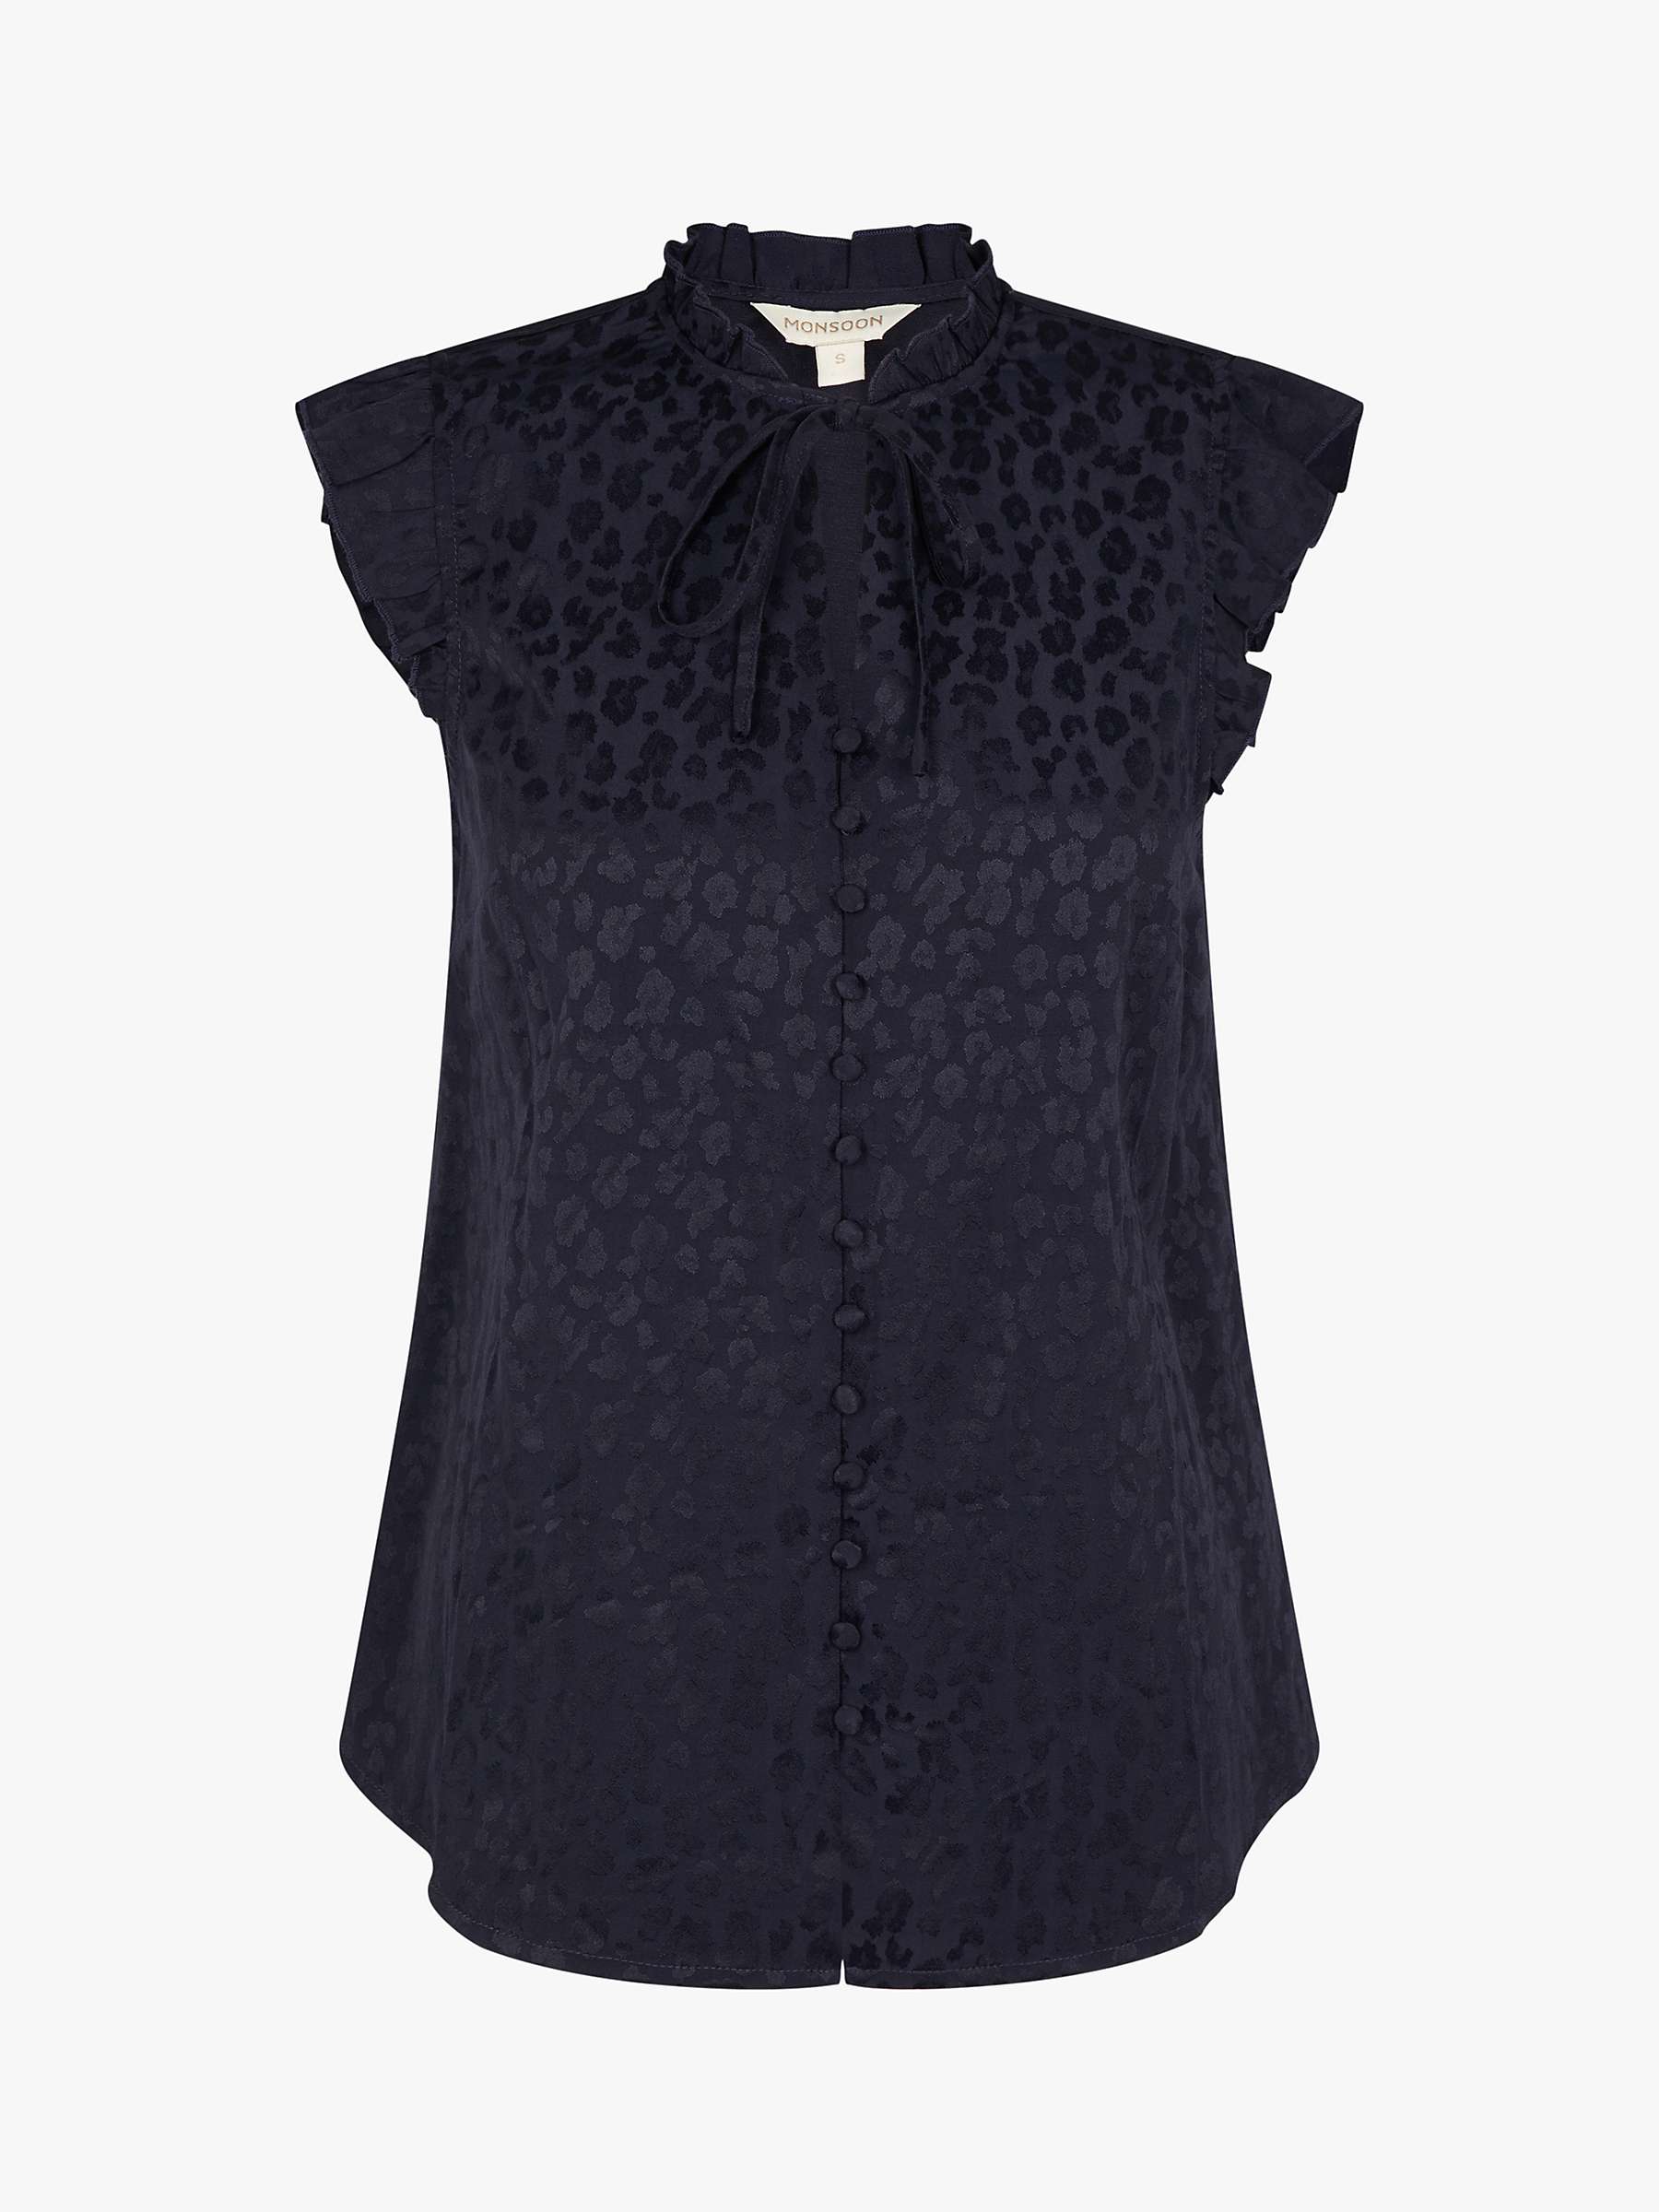 Buy Monsoon Stacy Animal Print Jersey Back Blouse, Navy Online at johnlewis.com